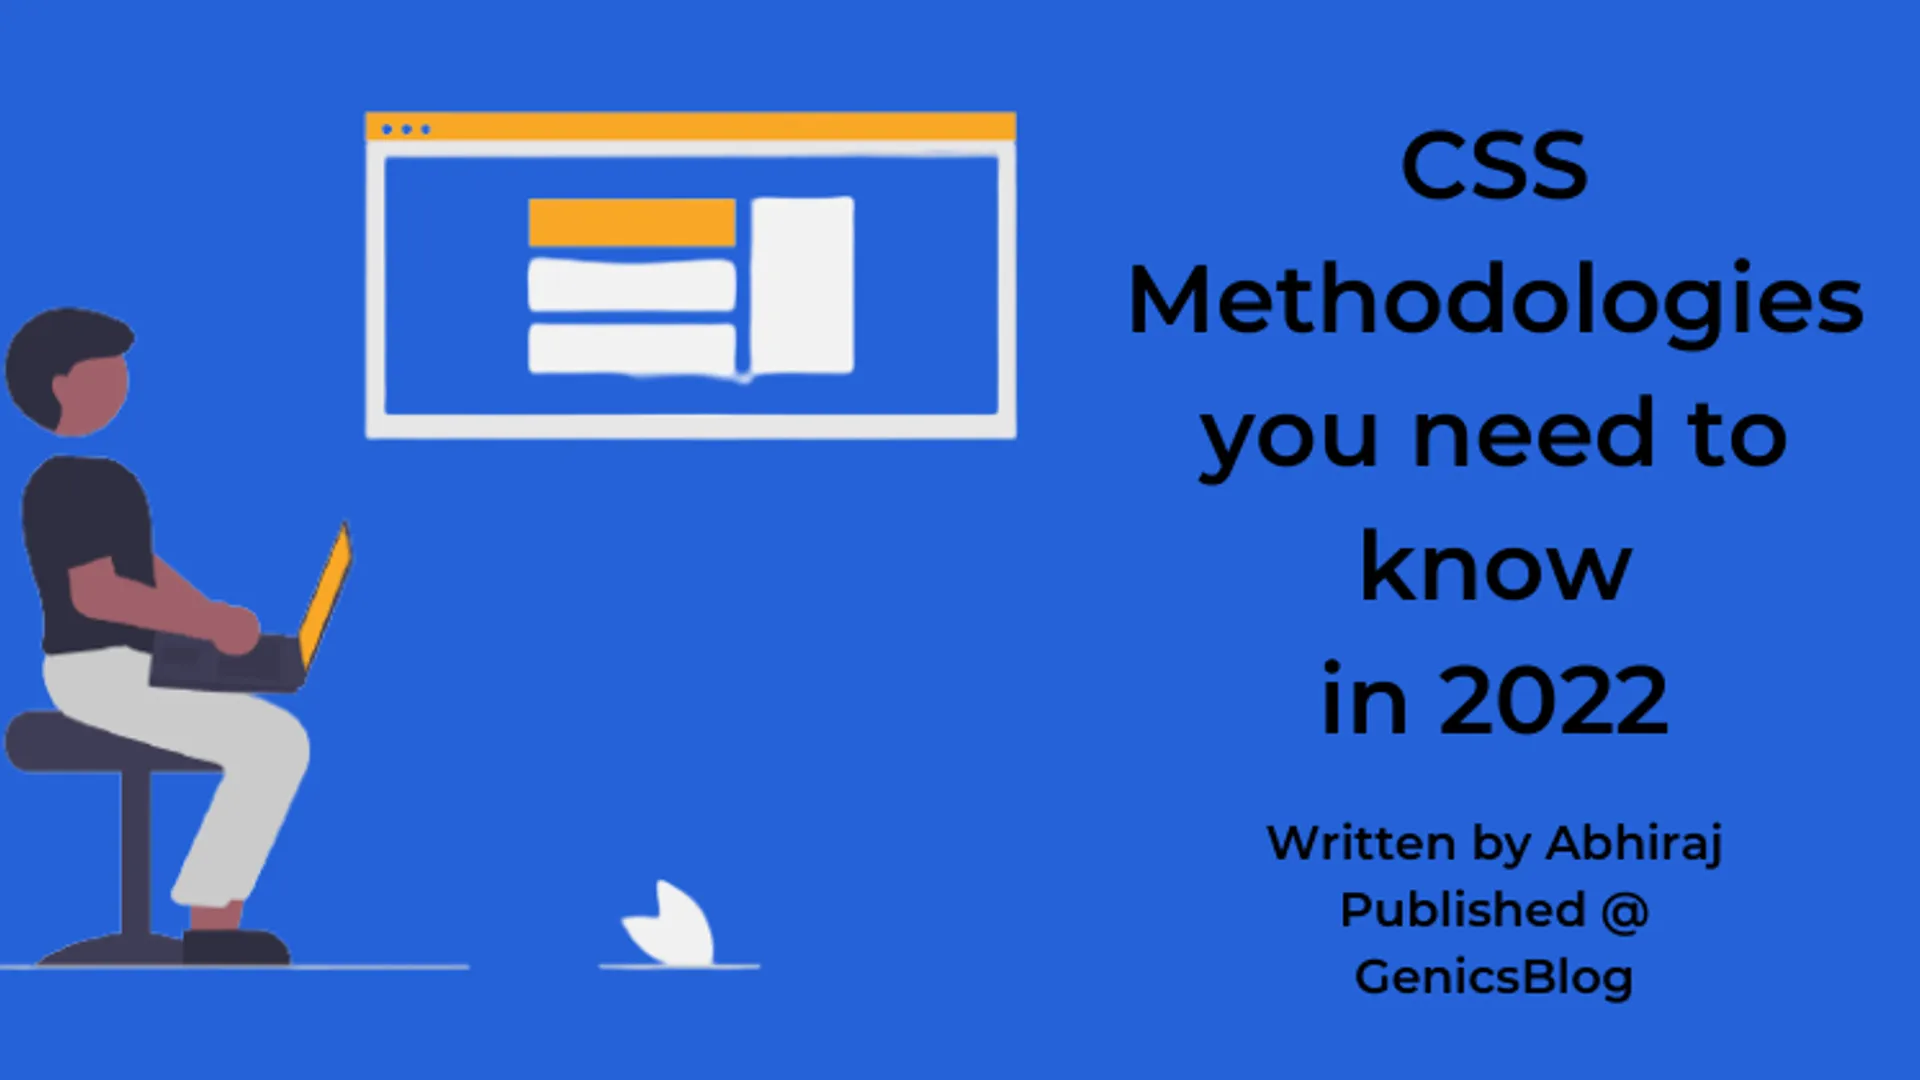 5 CSS methodologies you need to know in 2022